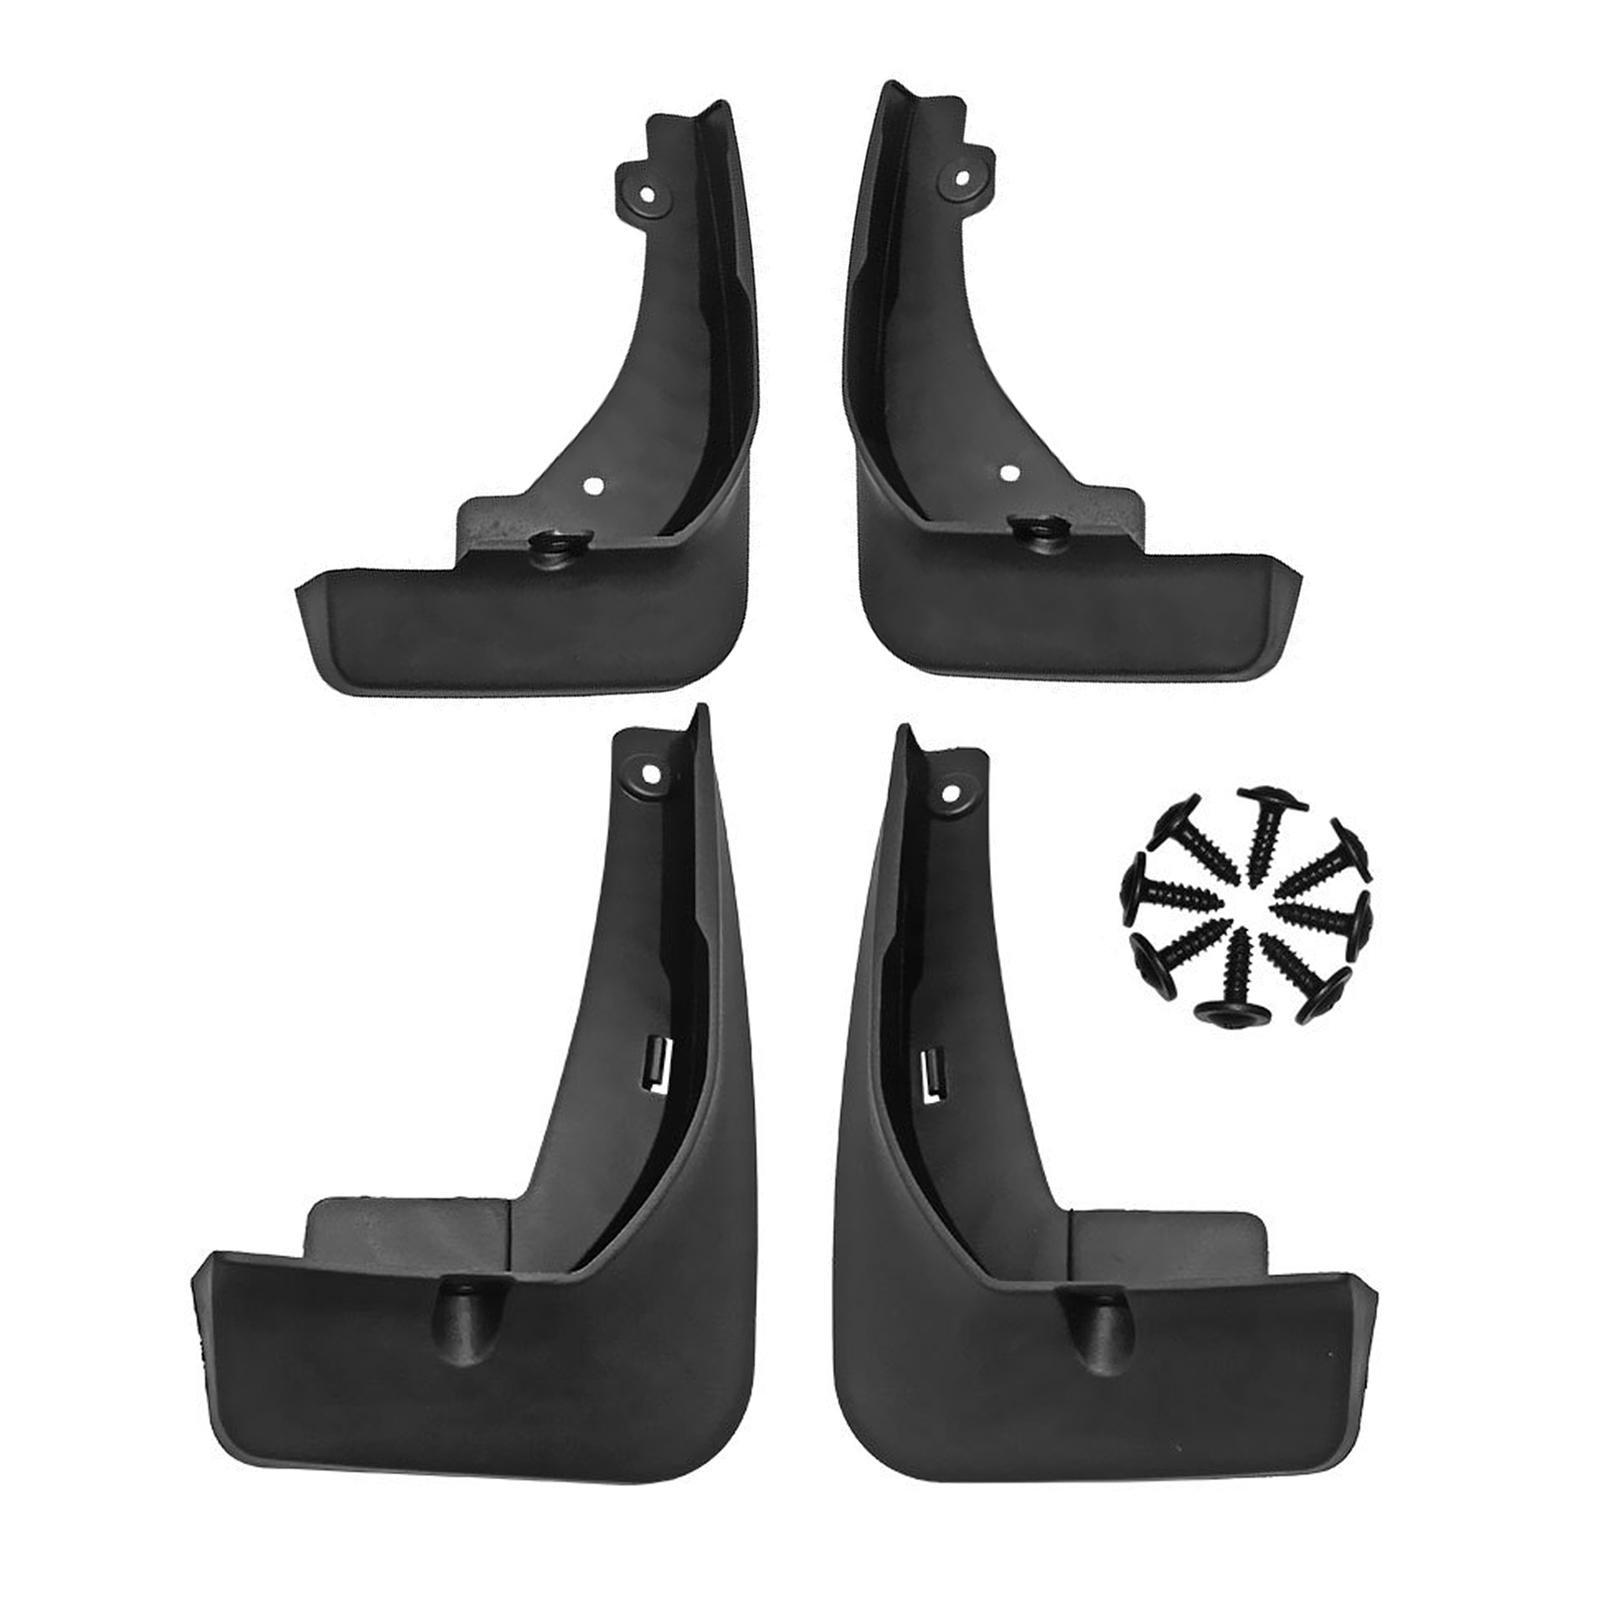 4 Pieces Car Wheel Mud Flaps Replaces Mudguard for   Cross